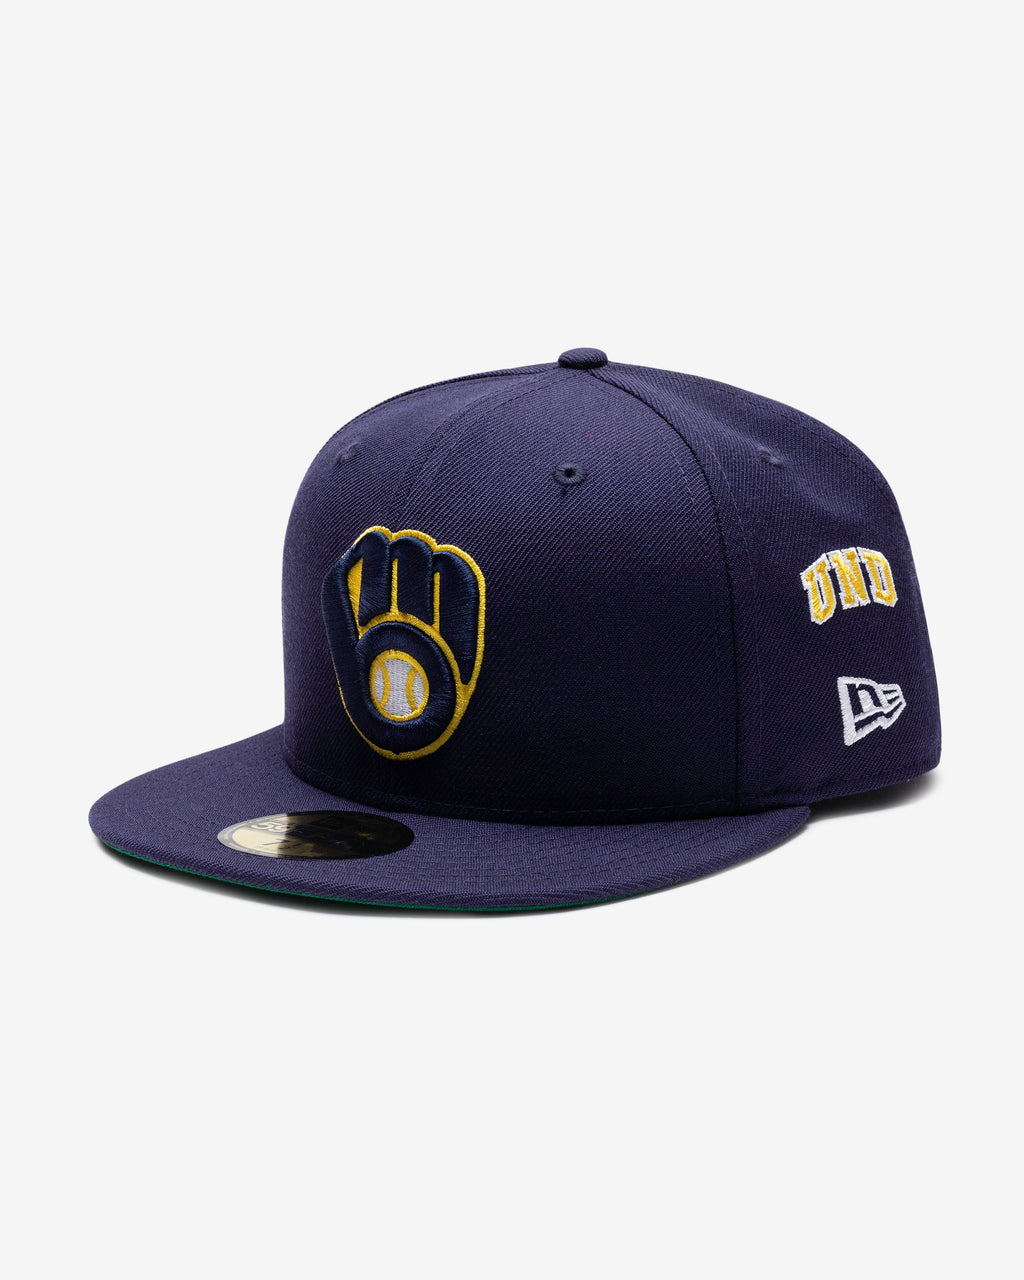 UNDEFEATED X NE X MLB FITTED - MILWAUKEE BREWERS